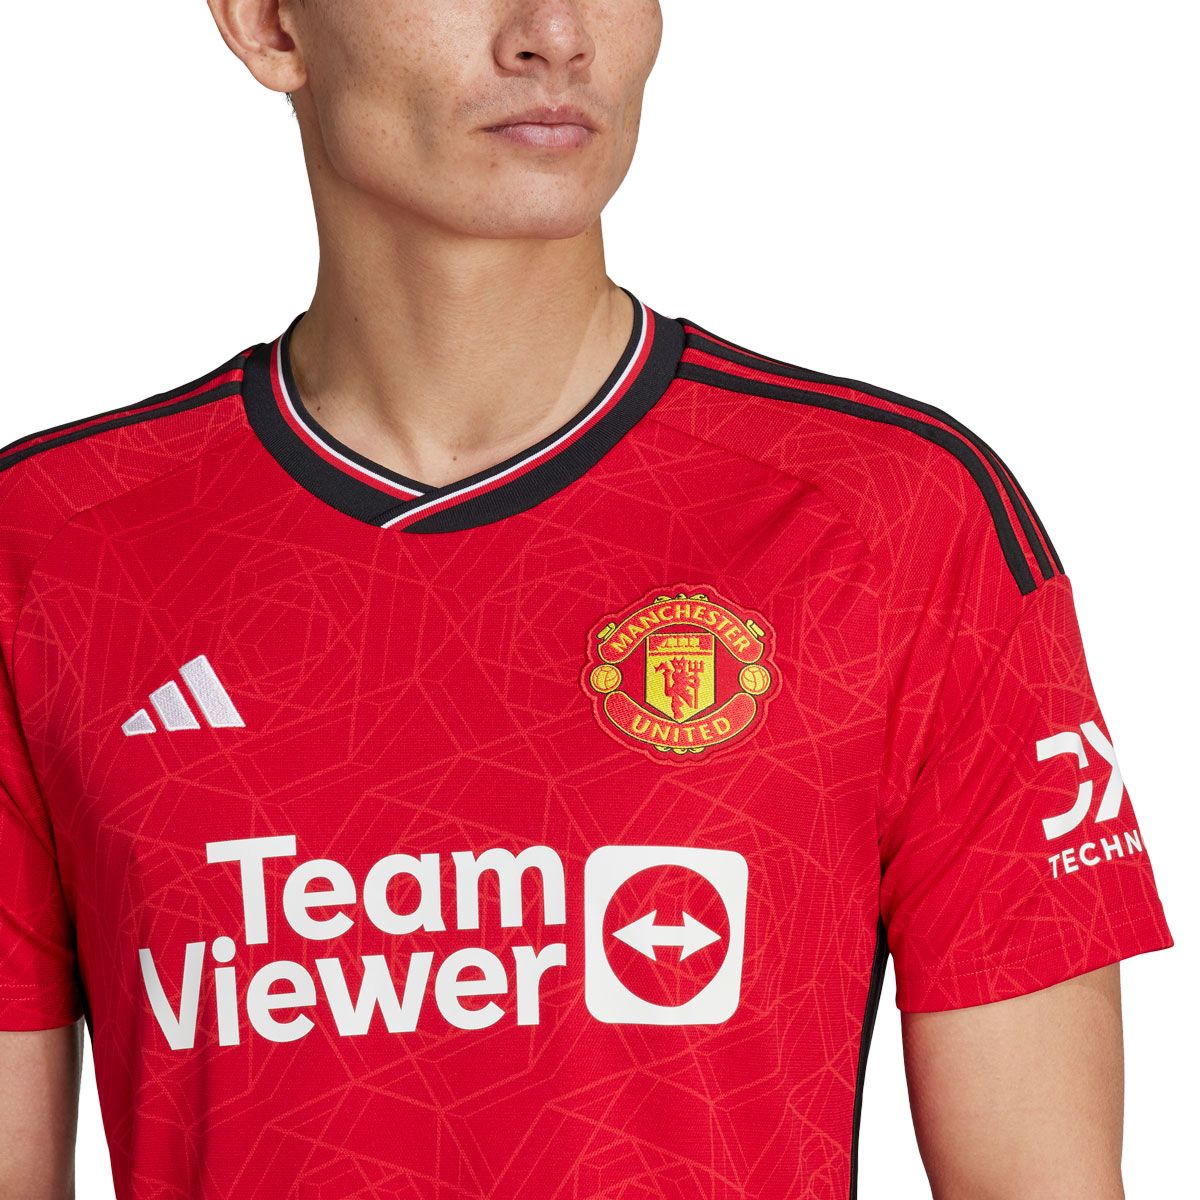 Manchester united kit 2021/22 - MUFC Adidas Jersey - Authentic vs Replica -  Jersey Comparison CR7 